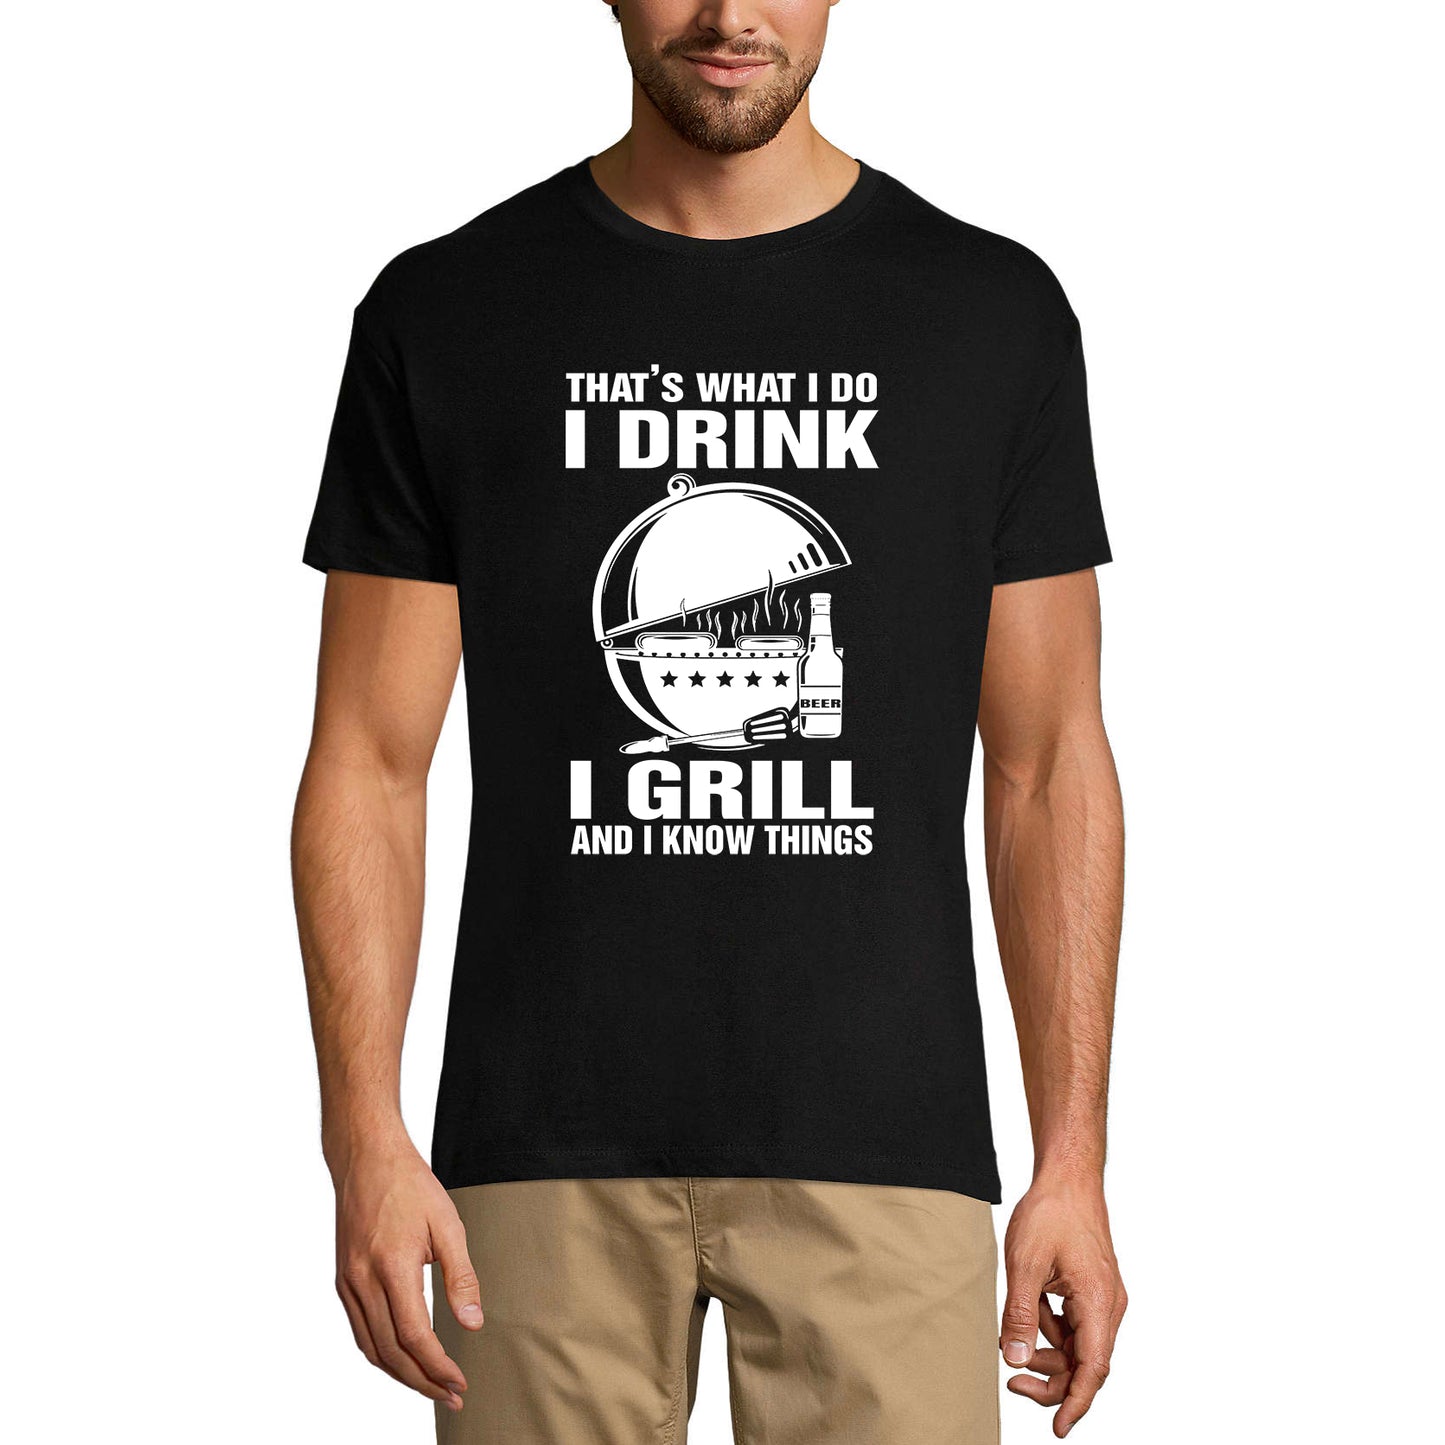 ULTRABASIC Herren-T-Shirt „That's What I Do I Drink I Grill and I Know Things“ – lustiges Bierliebhaber-T-Shirt